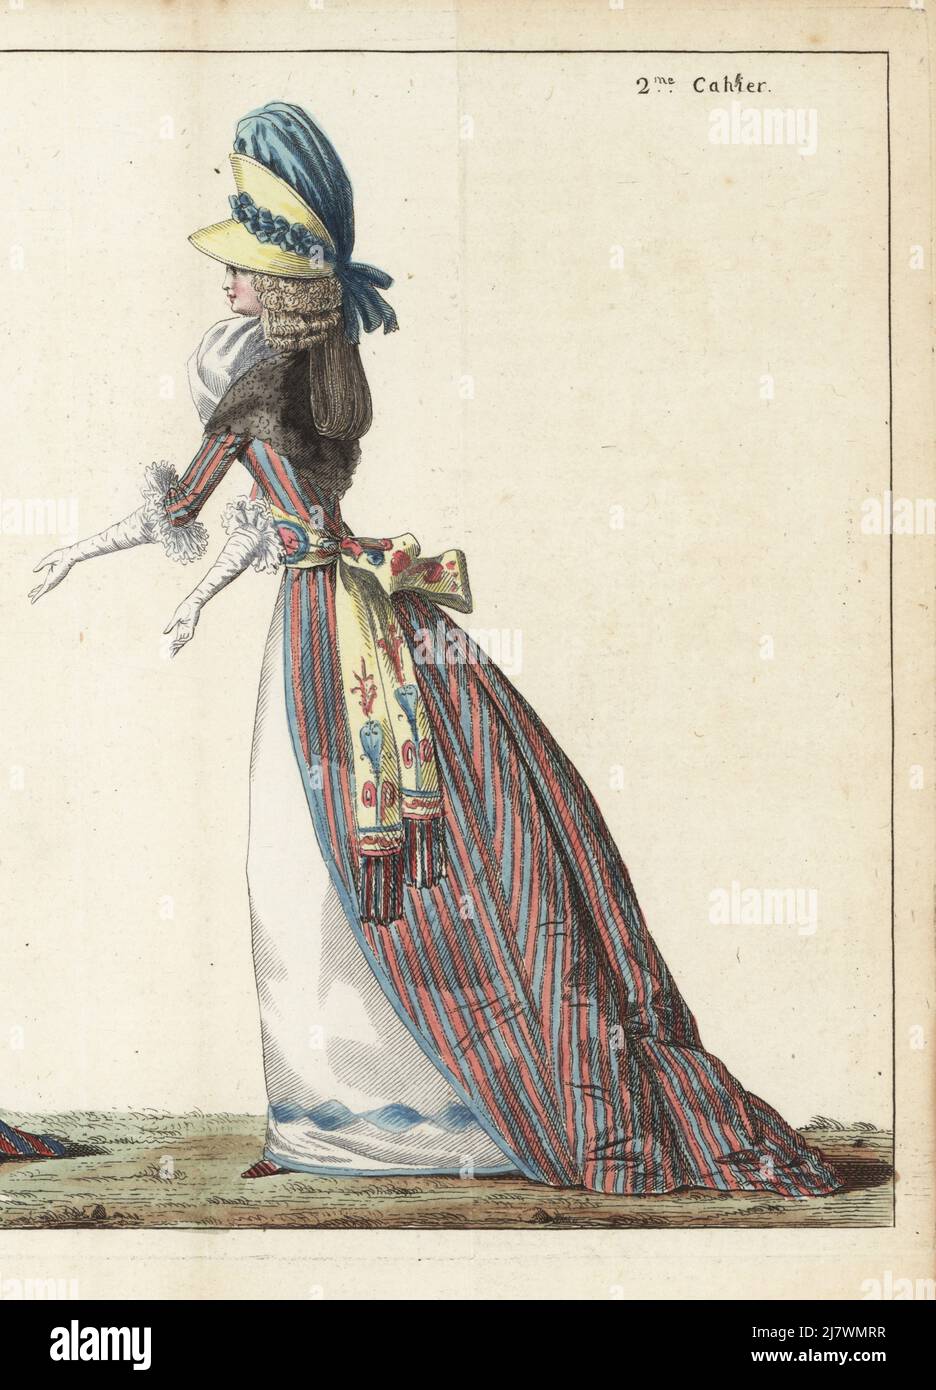 Woman in chapeau-casque of yellow satin straw and blue satin, tapet with five curls, black gauze fichu, satin robe in blue and maroon stripes, belt with arabesques and tricolor fringe, white satin petticoat with blue ribbon at hem. Handcoloured copperplate engraving from Jean-Antoine le Brun or Lebrun-Tossa’s Journal de la Mode et du Gout, previously Cabinet des Modes, Chez Buisson, Paris, and Joseph le Boffe, London, 2me Cahier, 5 March 1790. Stock Photo